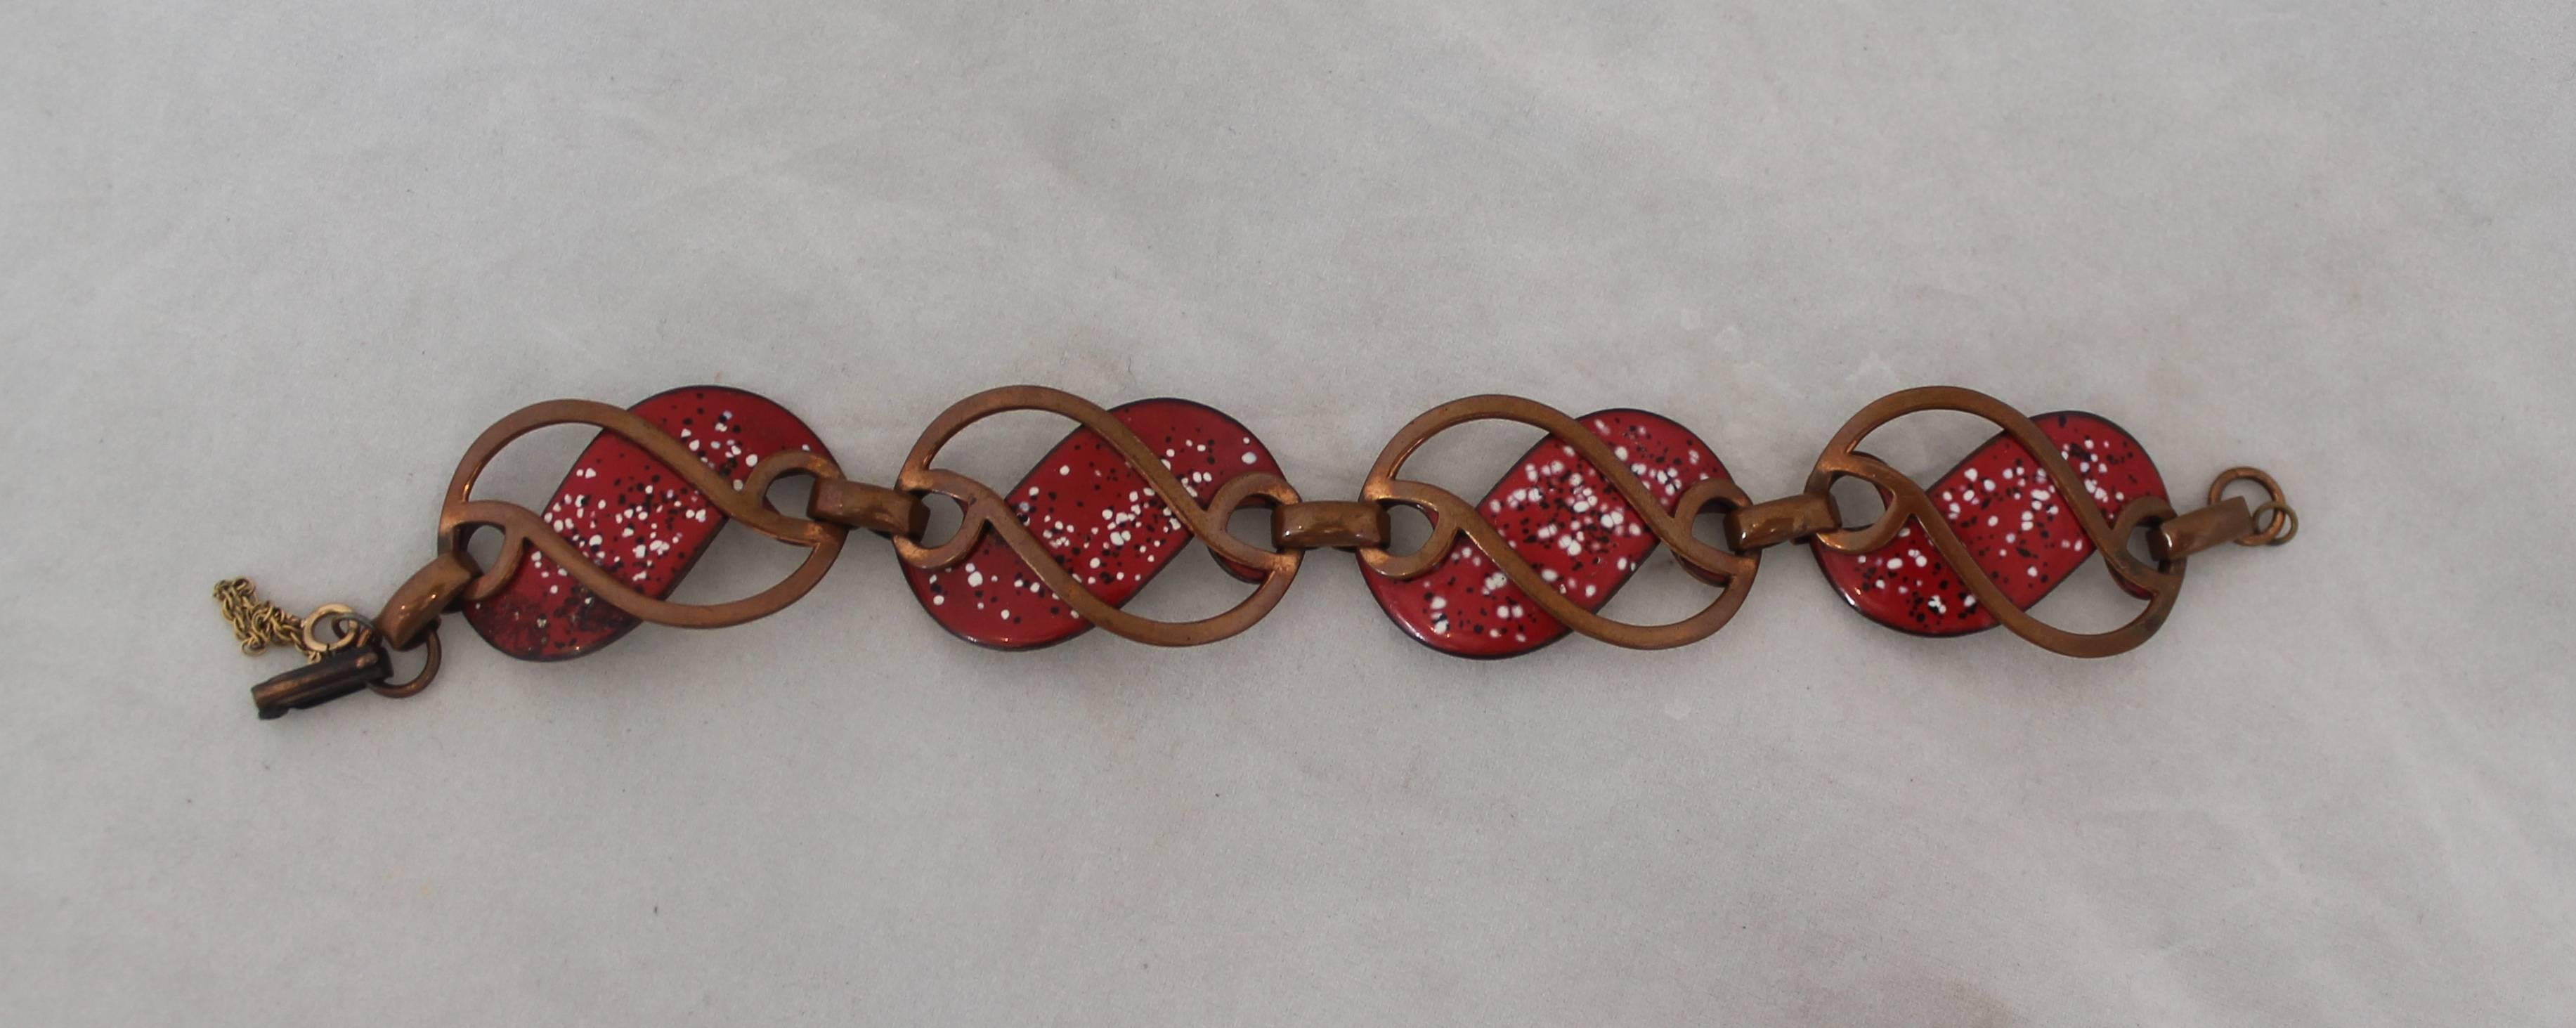 Rebajes Vintage Copper Cut-out Bracelet with Red Enamel - circa 1950's. This bracelet is in very good vintage condition with some tarnishing due to its age. The red enamel sections are spotted with white and black paint. 

Length- 8.25